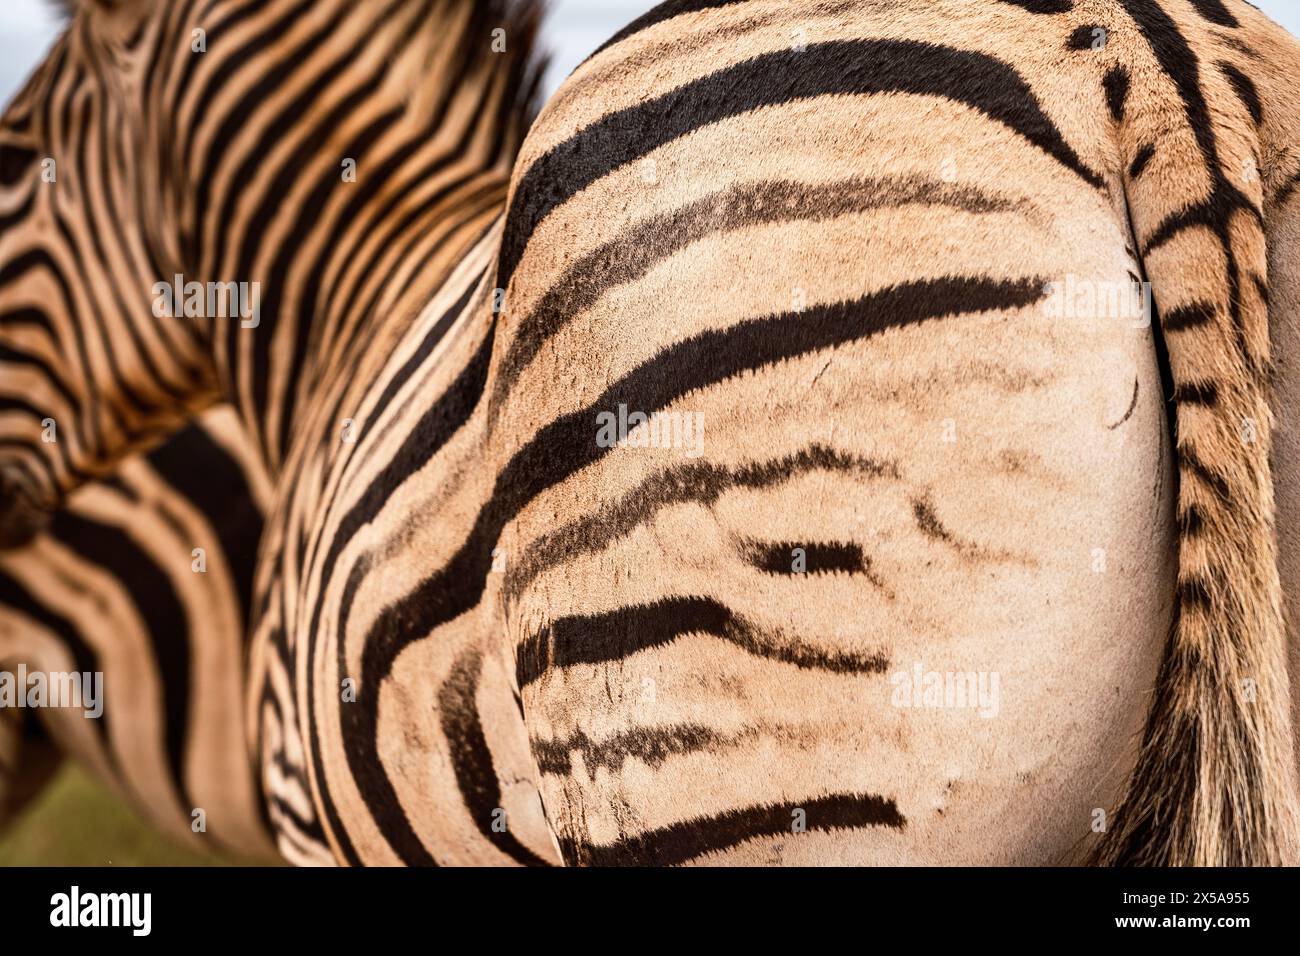 Detailed close-up of a zebra's patterned hide, showcasing the unique black and white stripes. Stock Photo